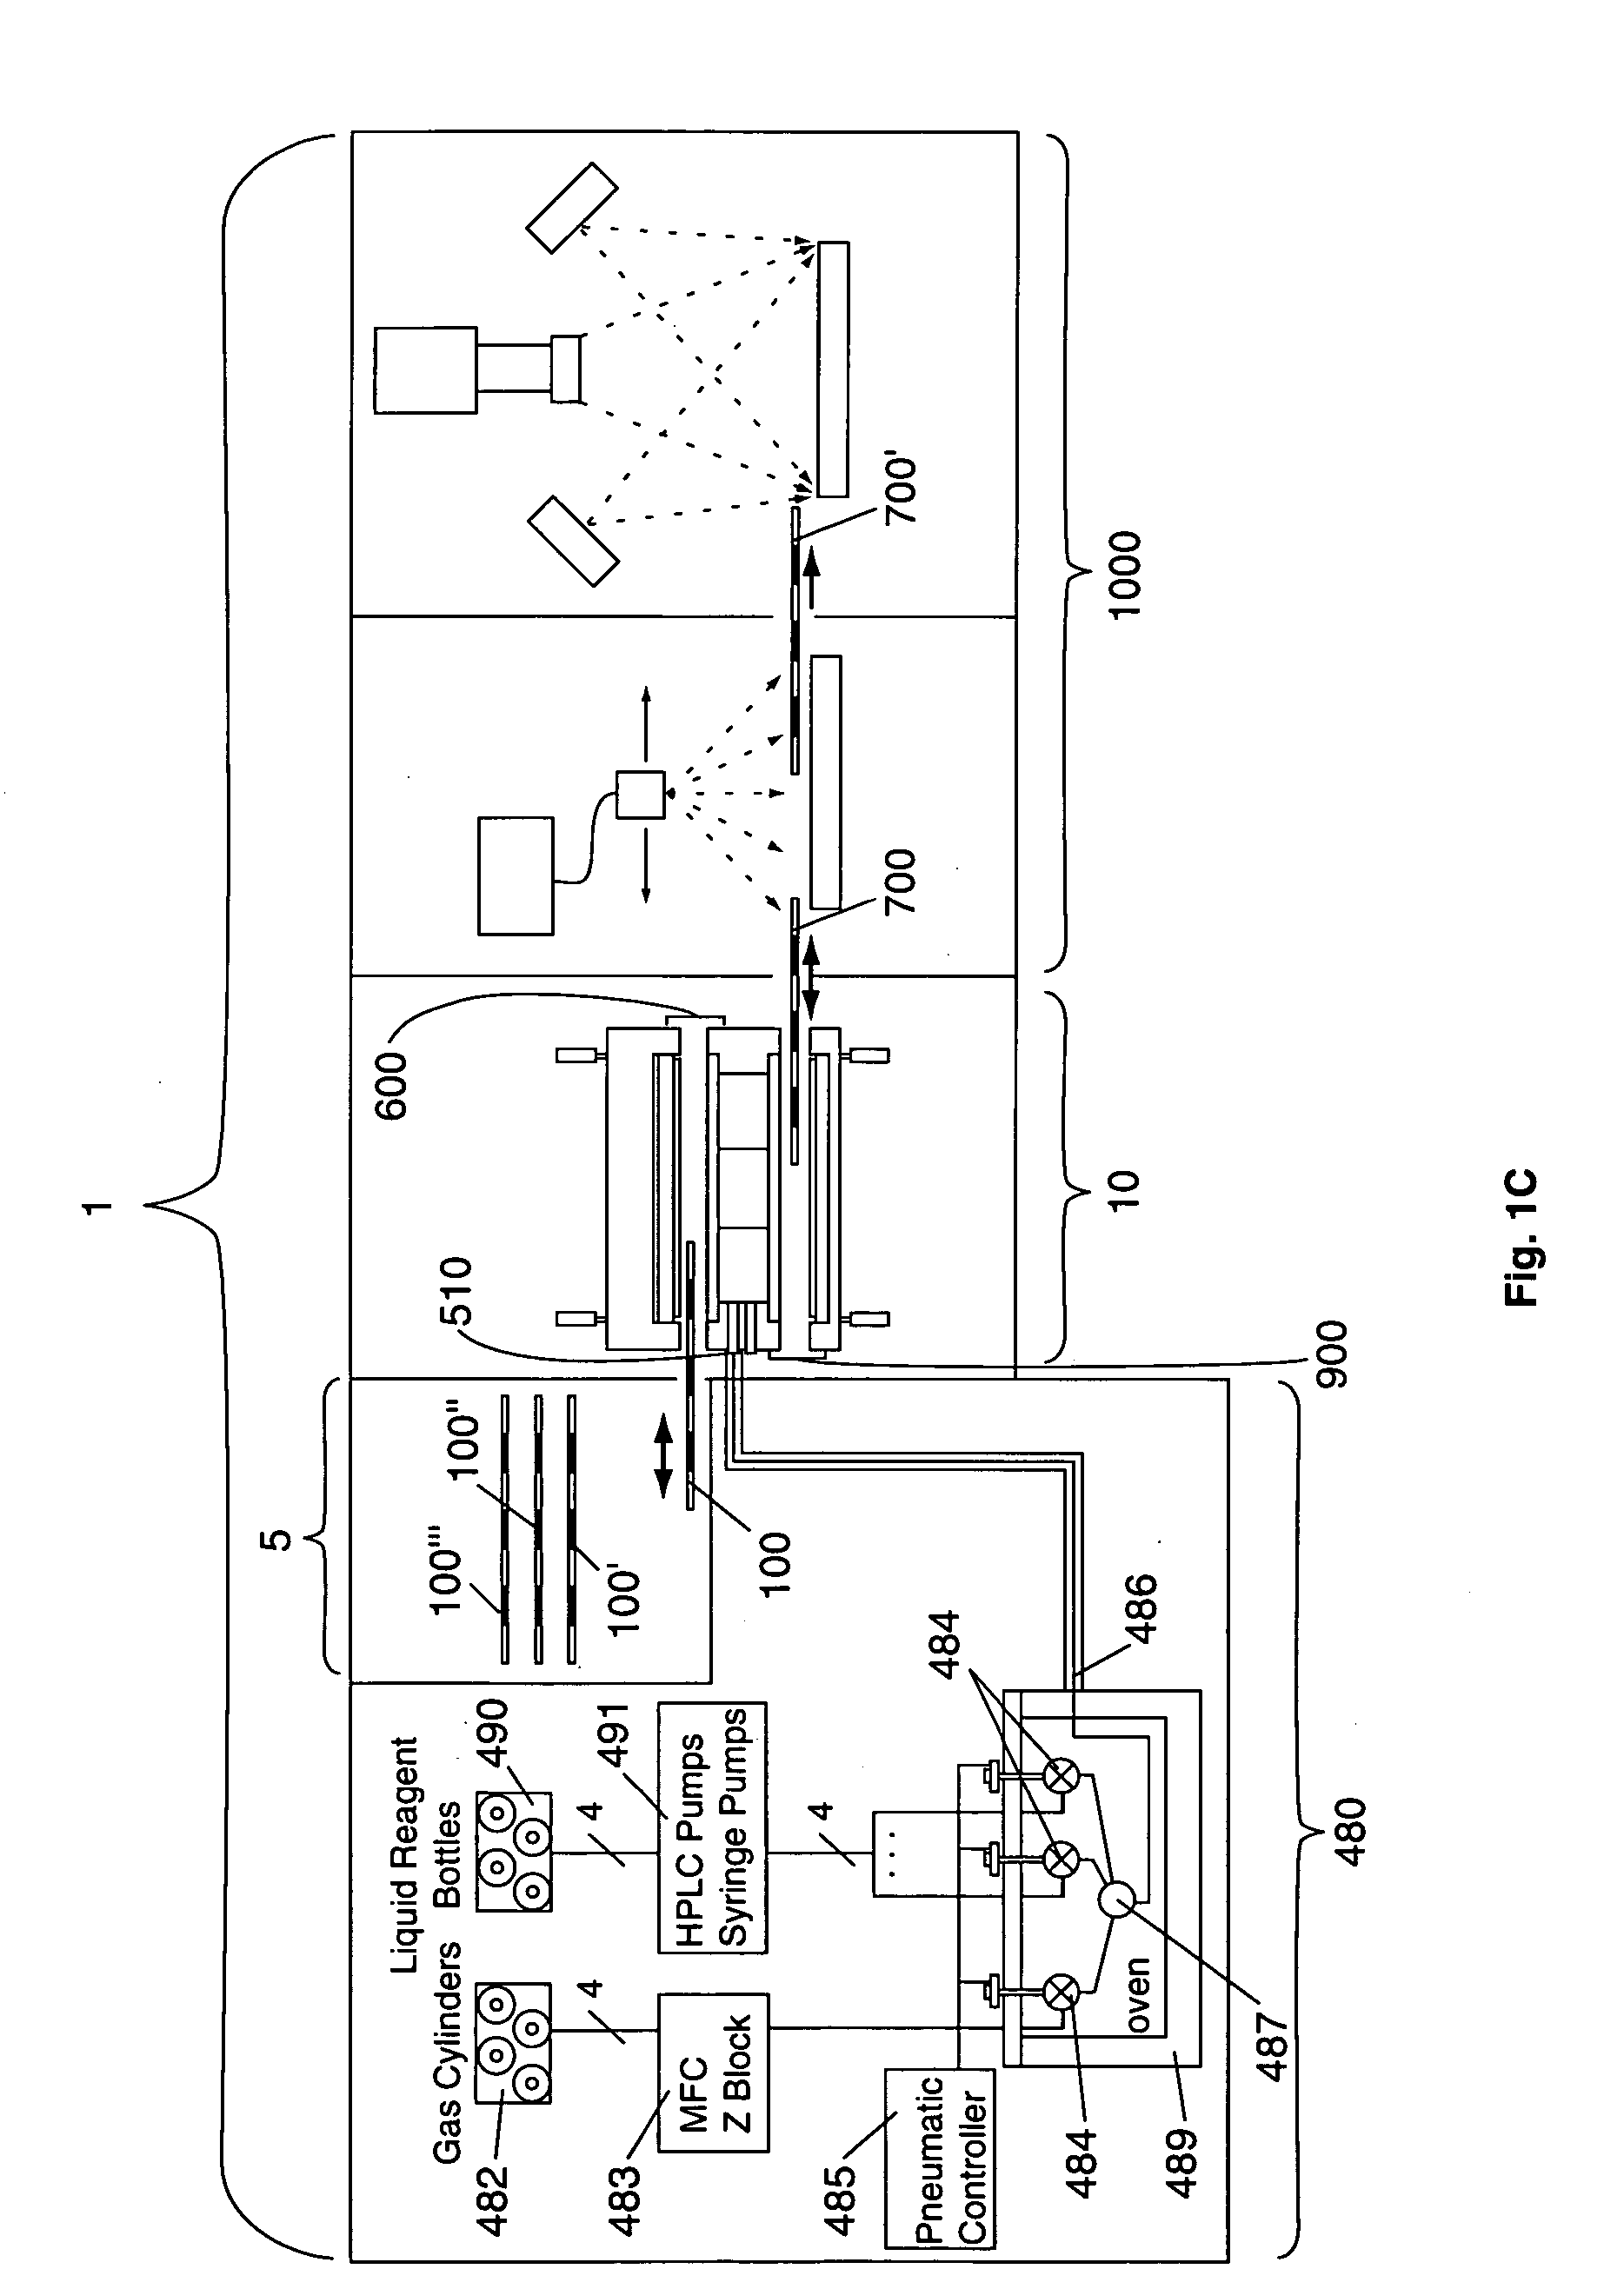 Chemical processing microsystems comprising high-temperature parallel flow microreactors